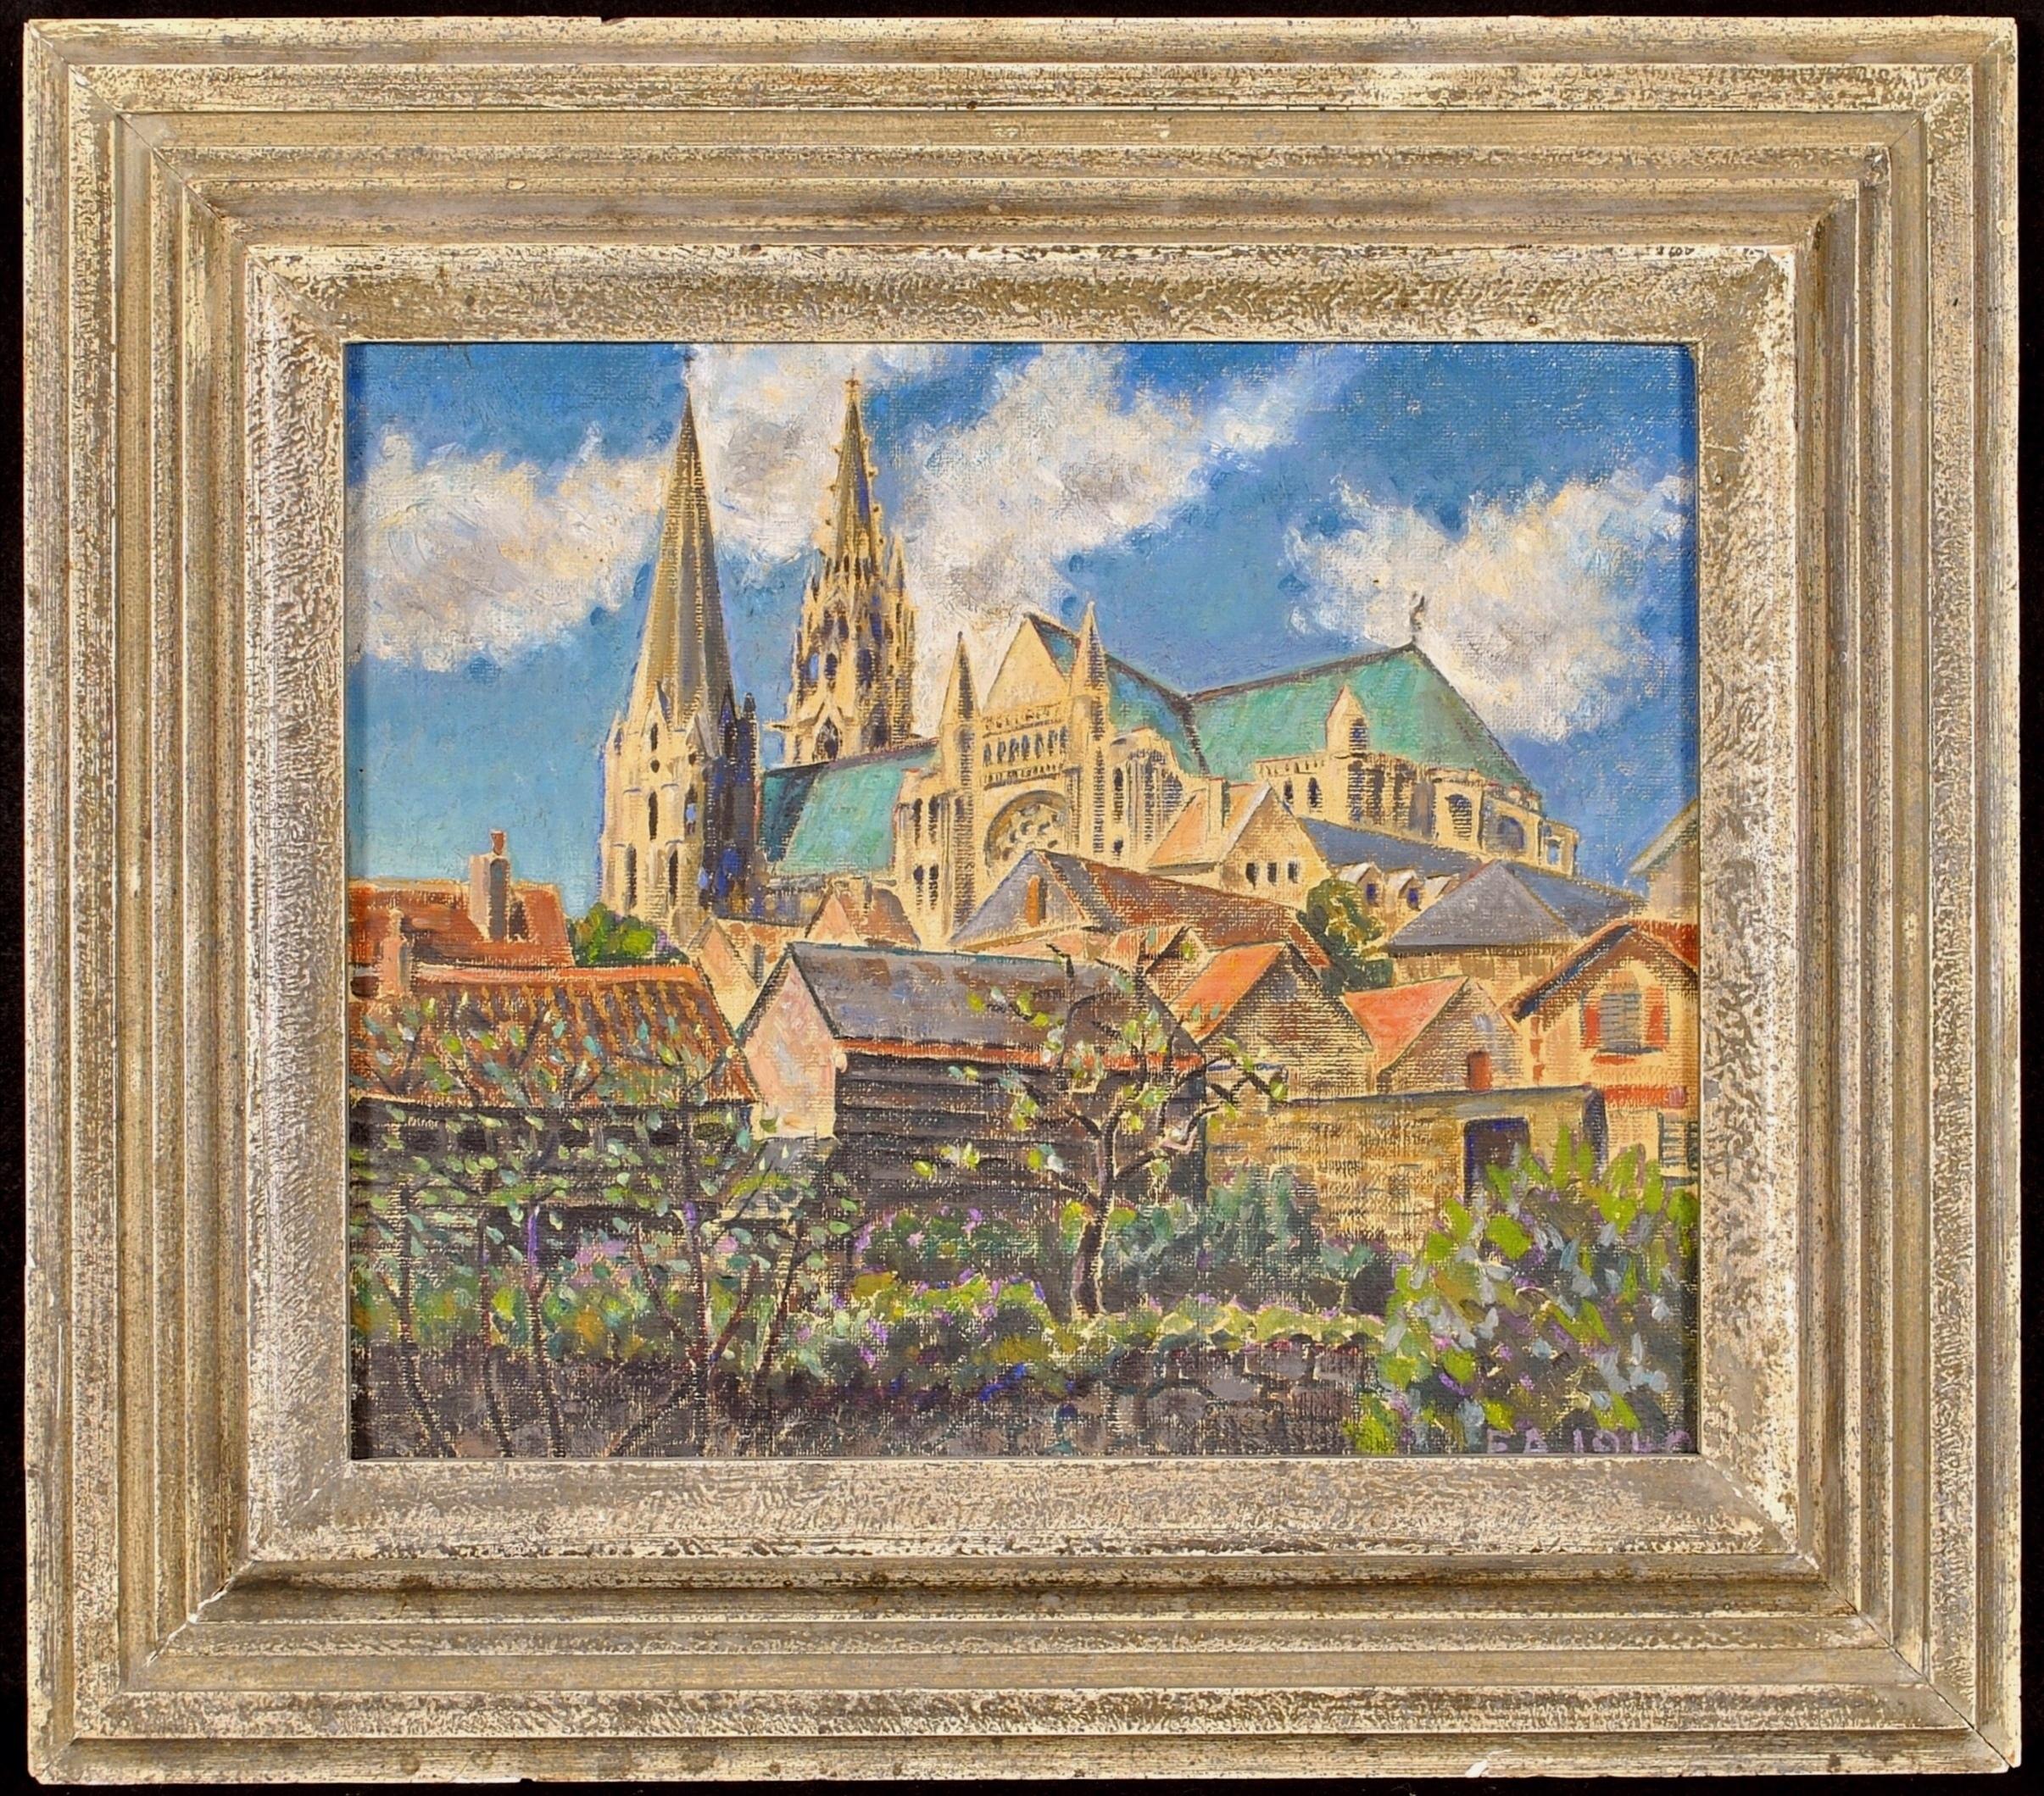 Faith Ashford Landscape Painting - Chartres - English Impressionist France Town Landscape Oil on Canvas Painting